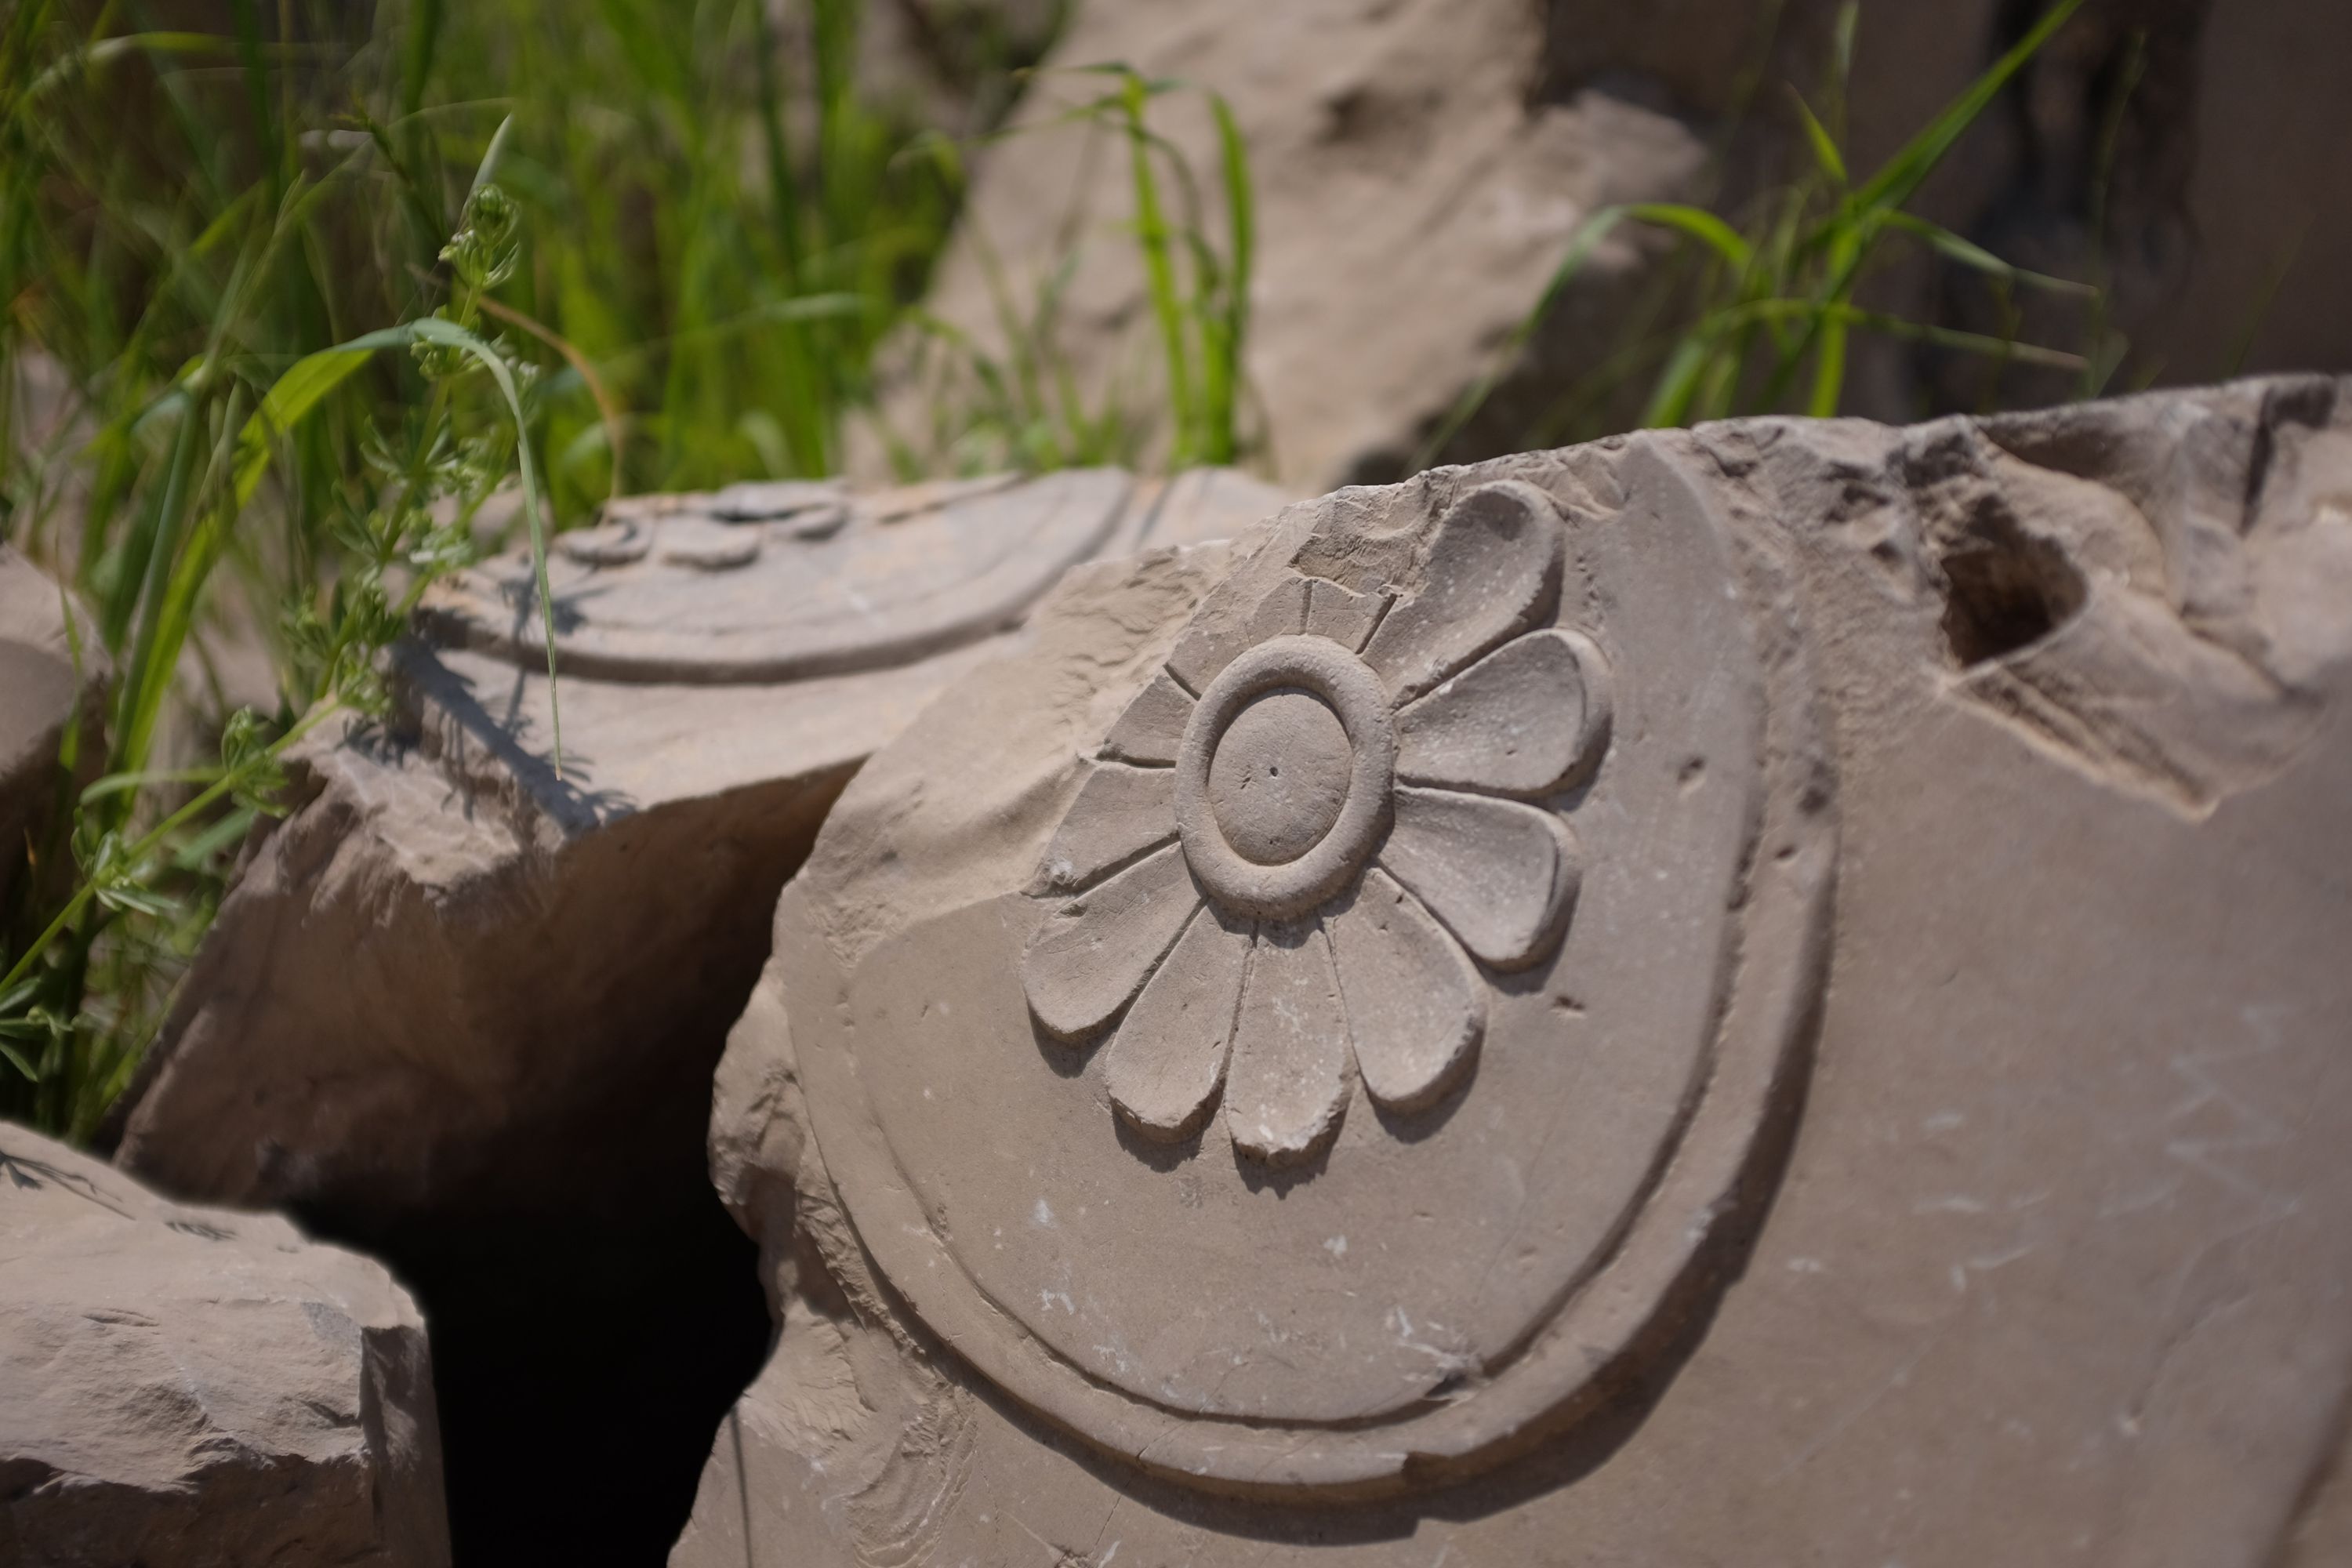 A symmetrical flower carved in a broken stone which lies in the grass.